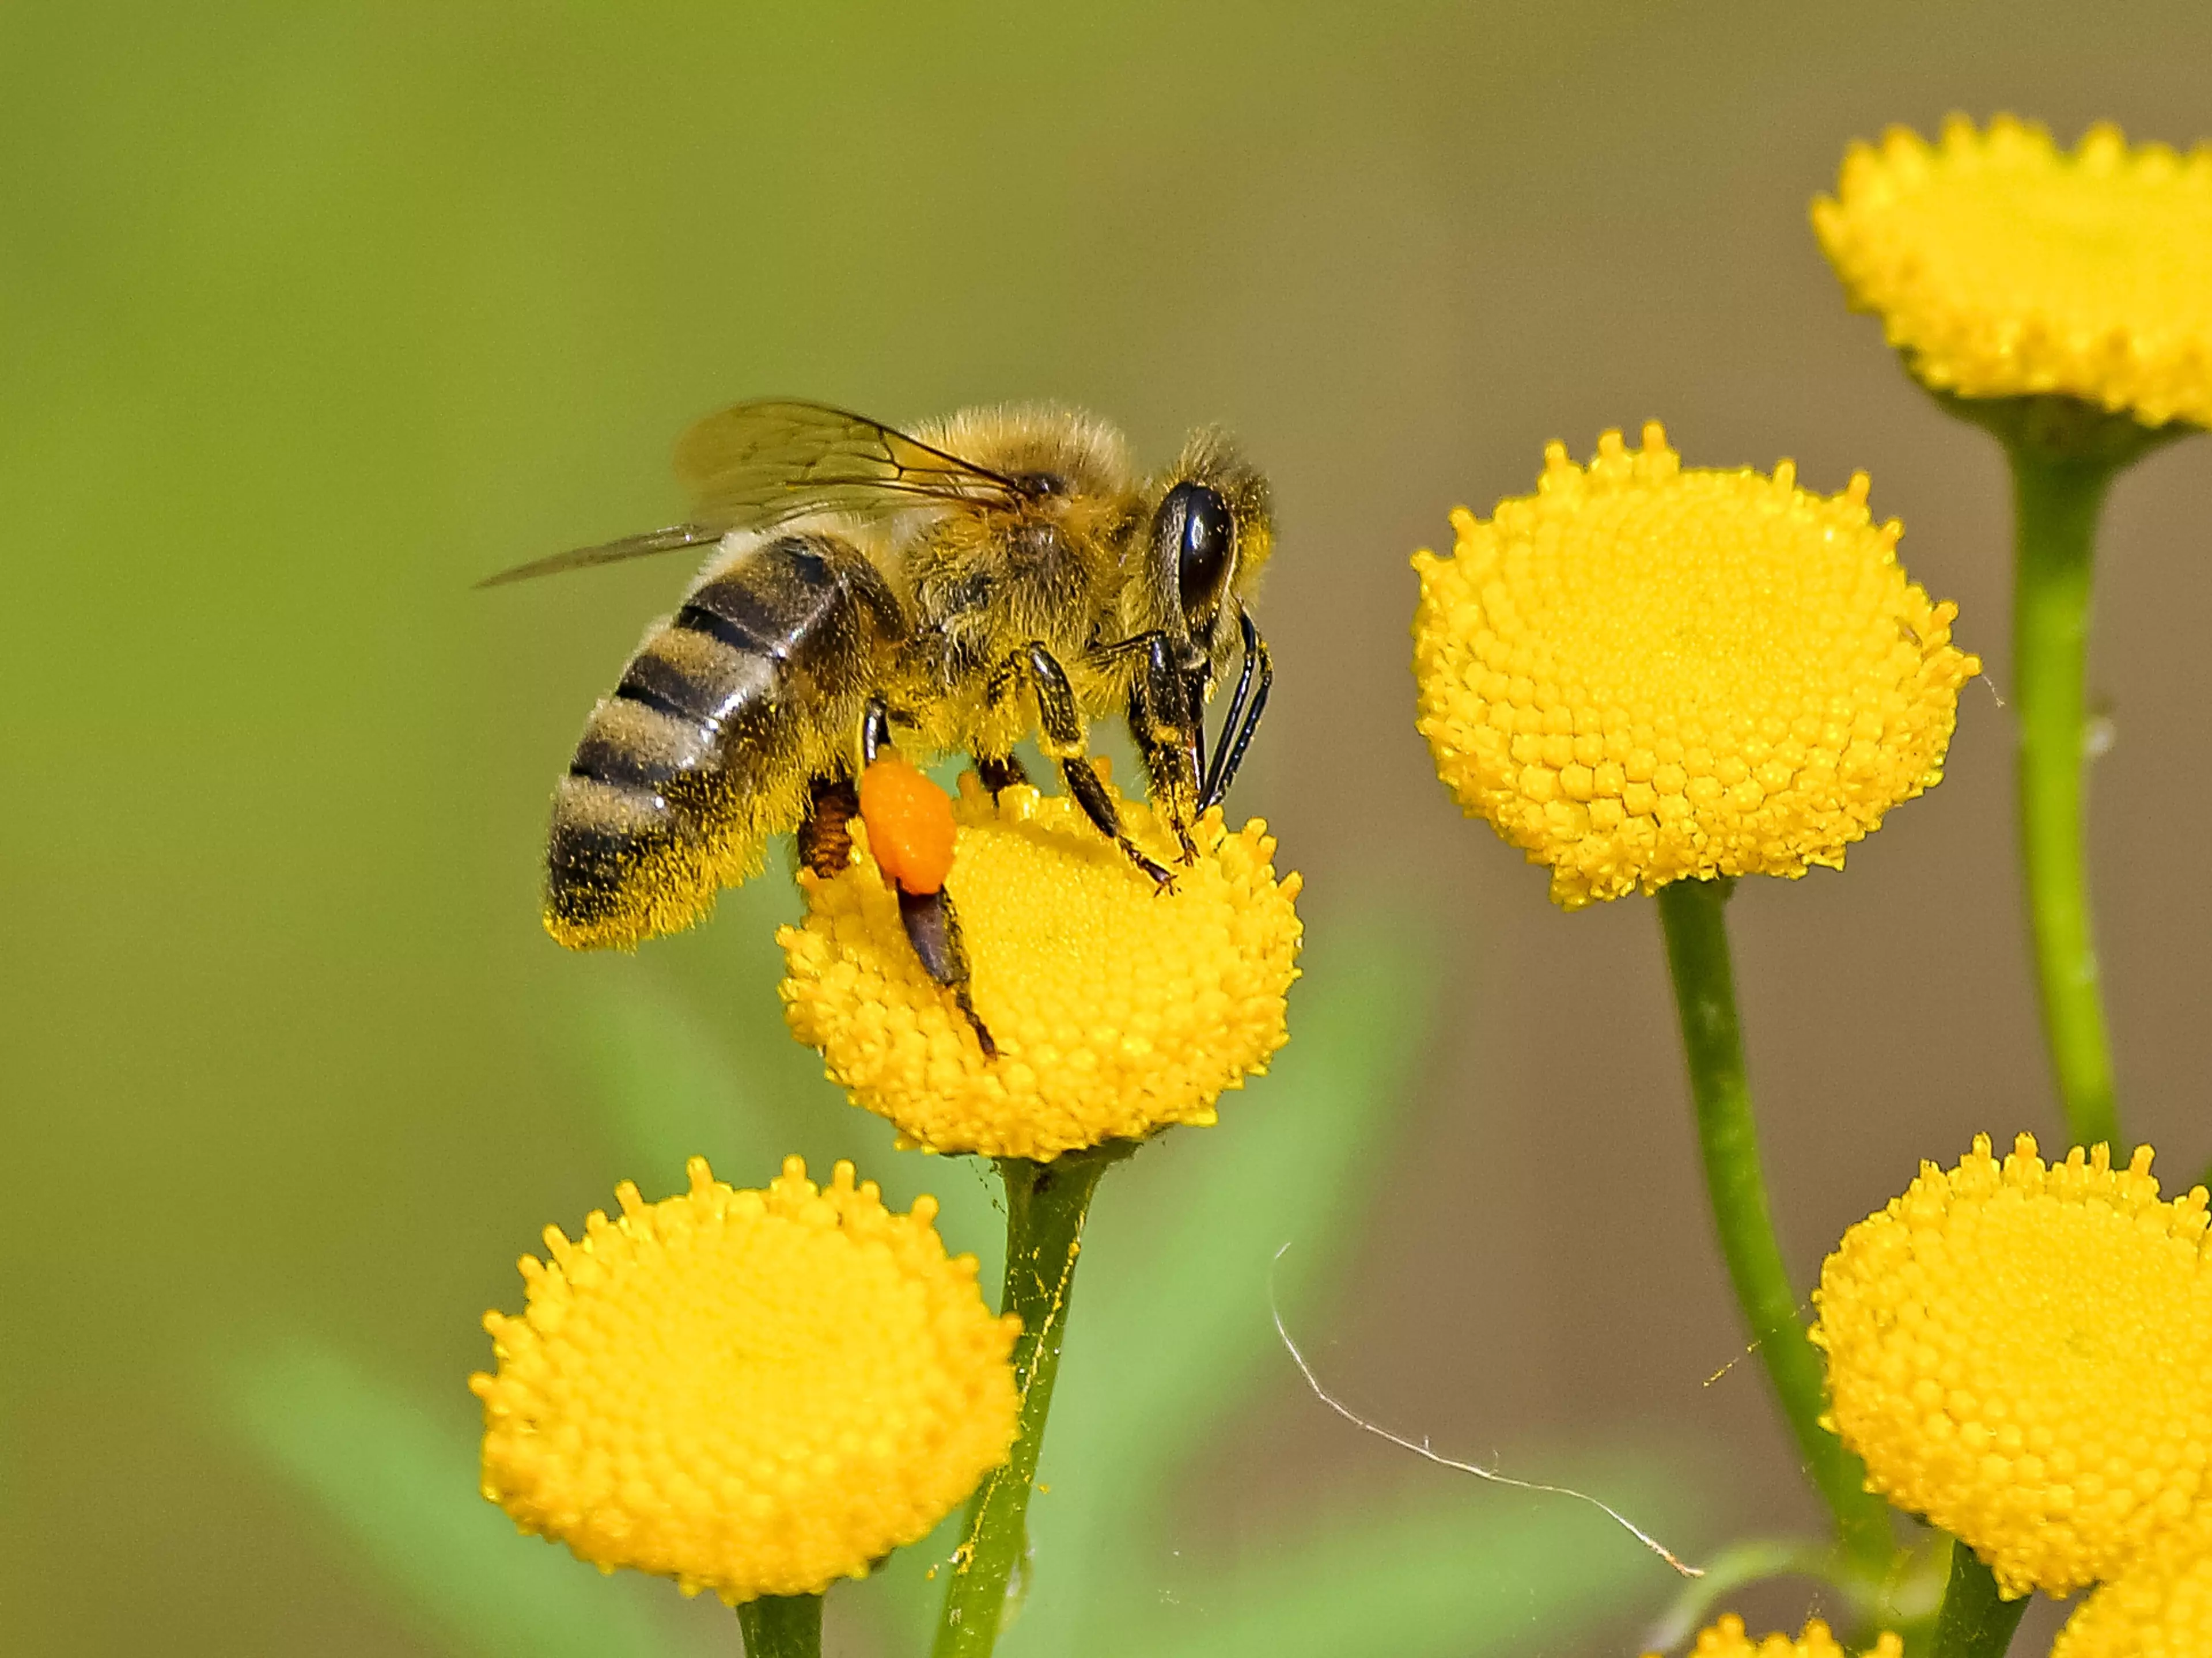 70 per cent of the world's agriculture depends exclusively on bees (